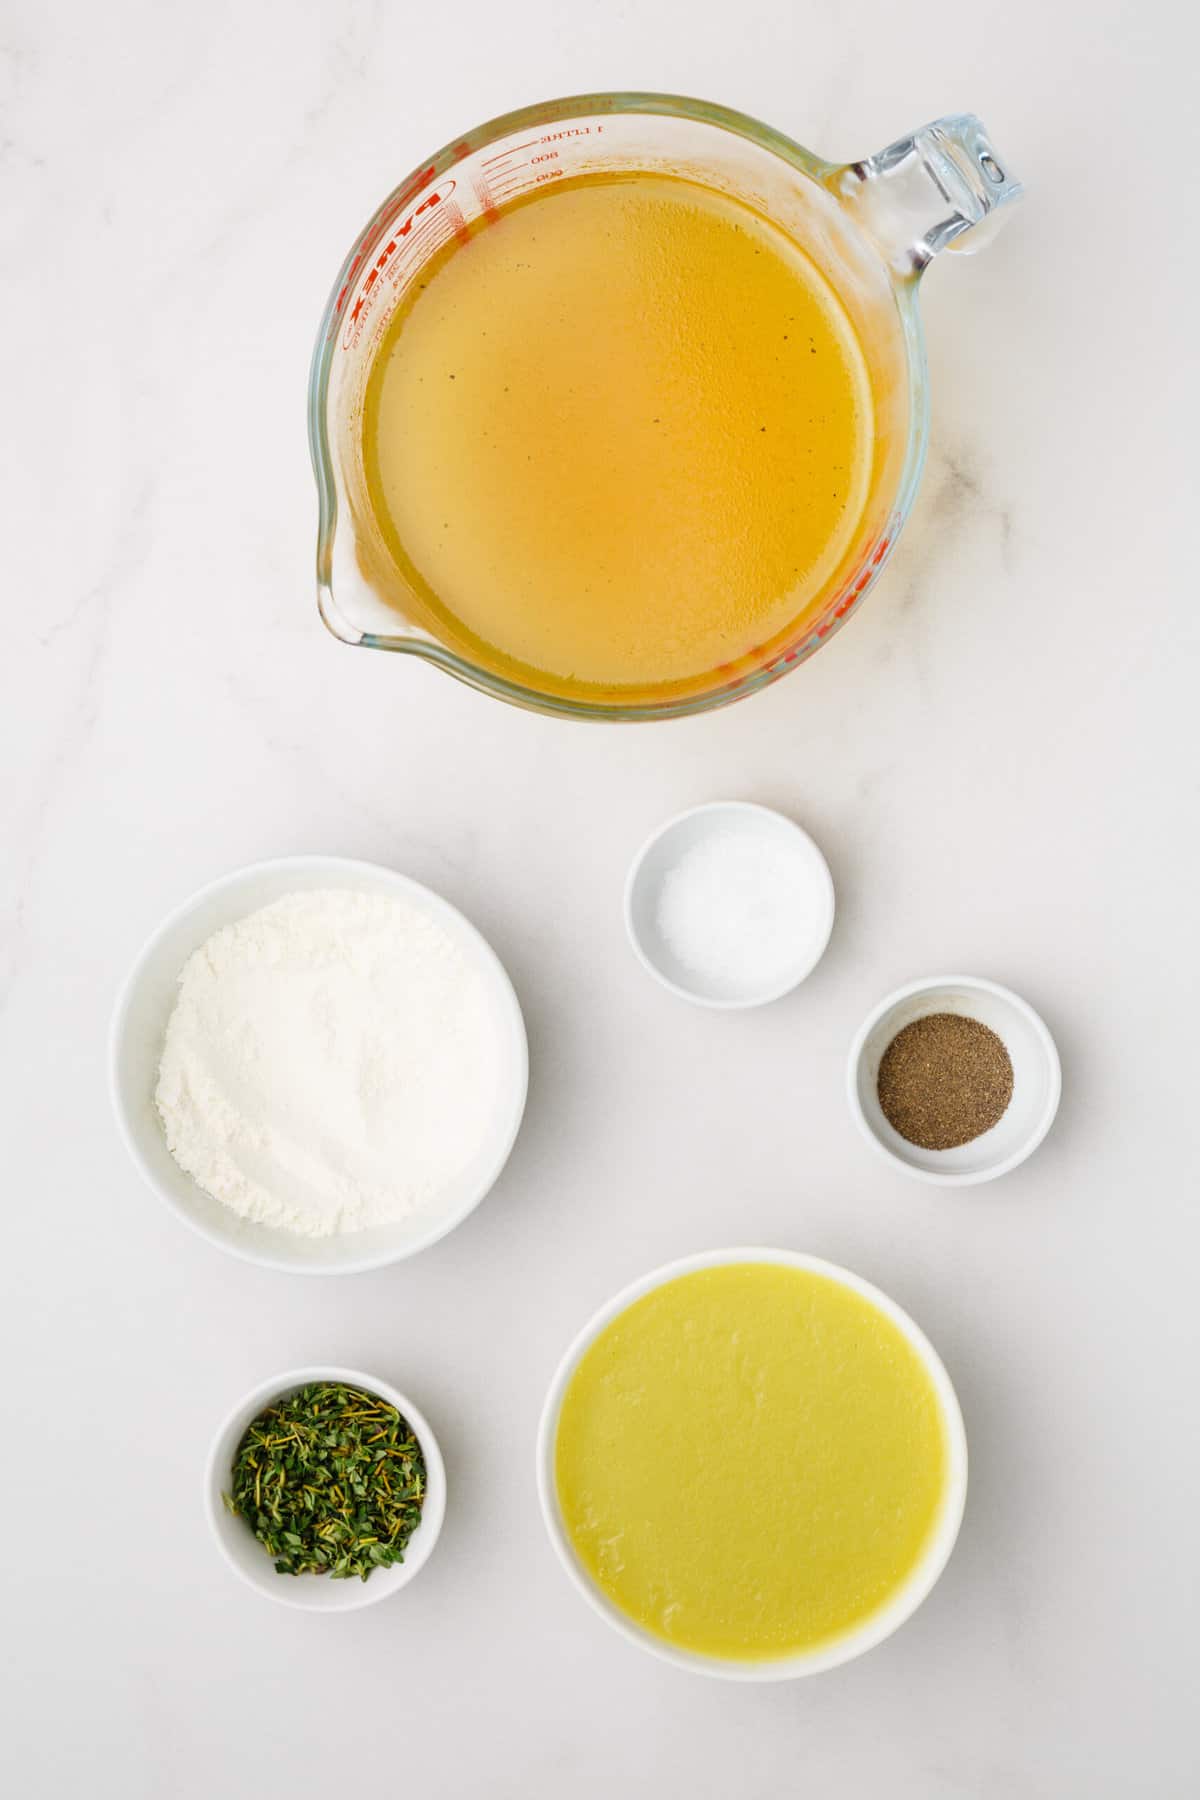 The ingredients to make turkey gravy are shown portioned out on a white background: turkey broth, butter, flour, thyme, and salt and pepper.